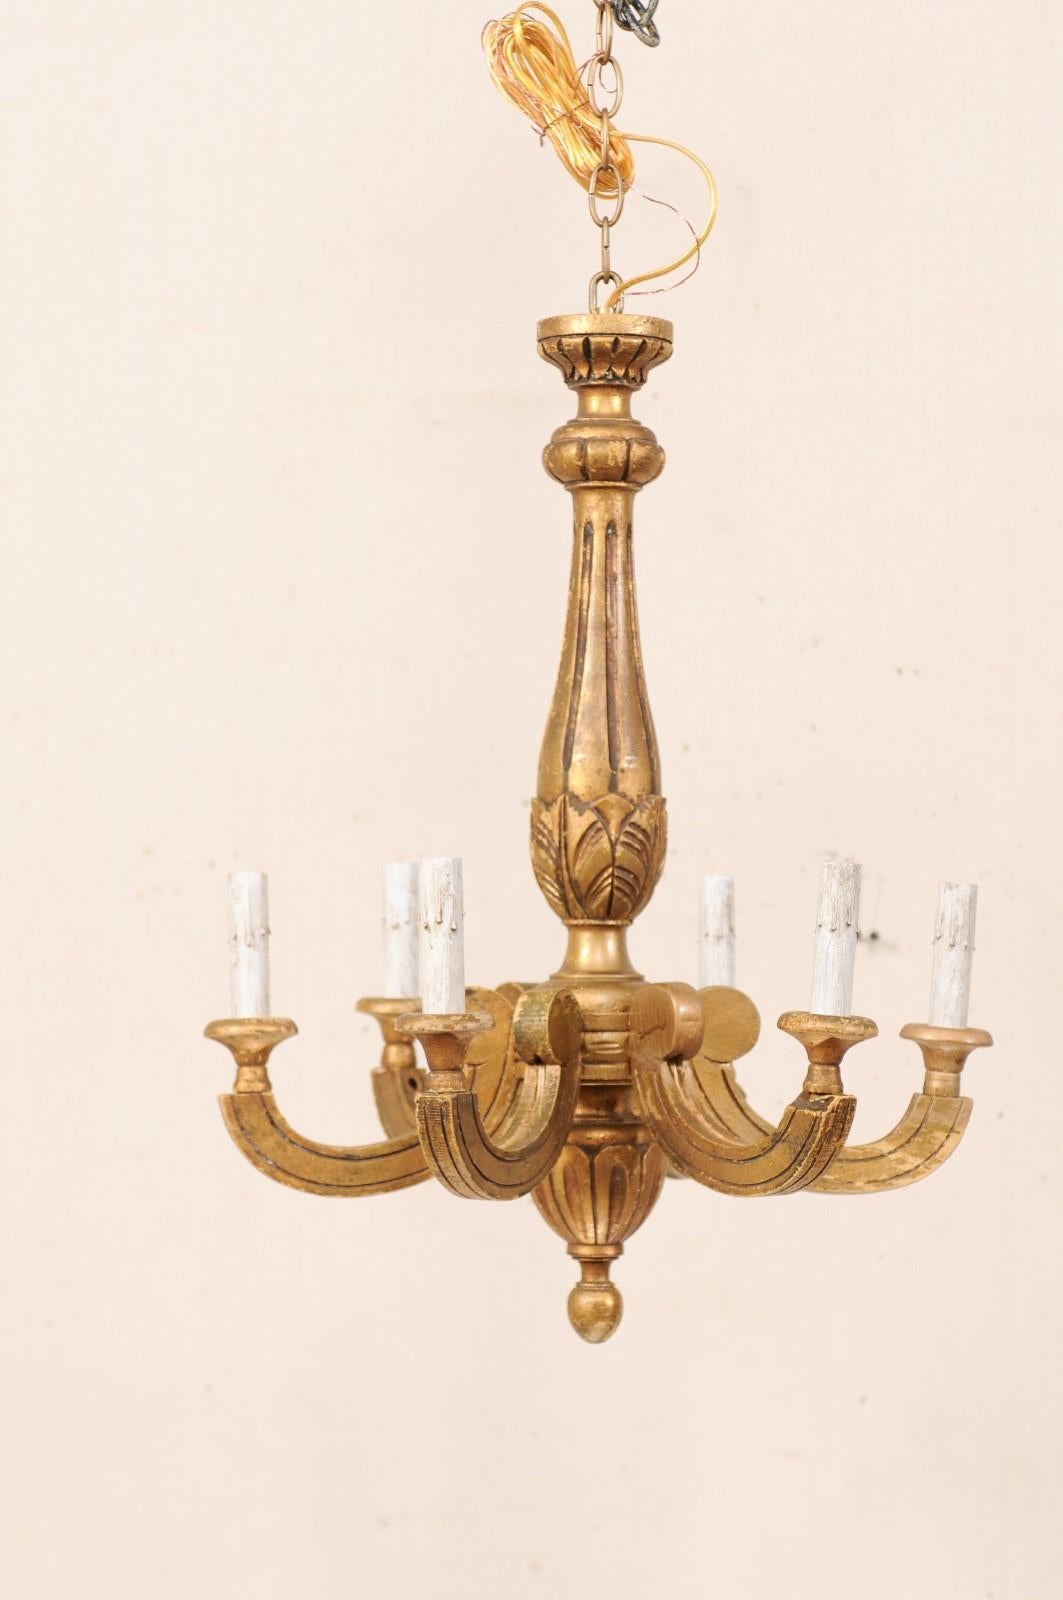 A French six-light carved and gilt wood chandelier from the mid-20th century. This vintage chandelier from France features a curvy central column, with fluted details, leaf motif carvings, and bottom finial. Six c-shaped arms, adorn the perimeter of